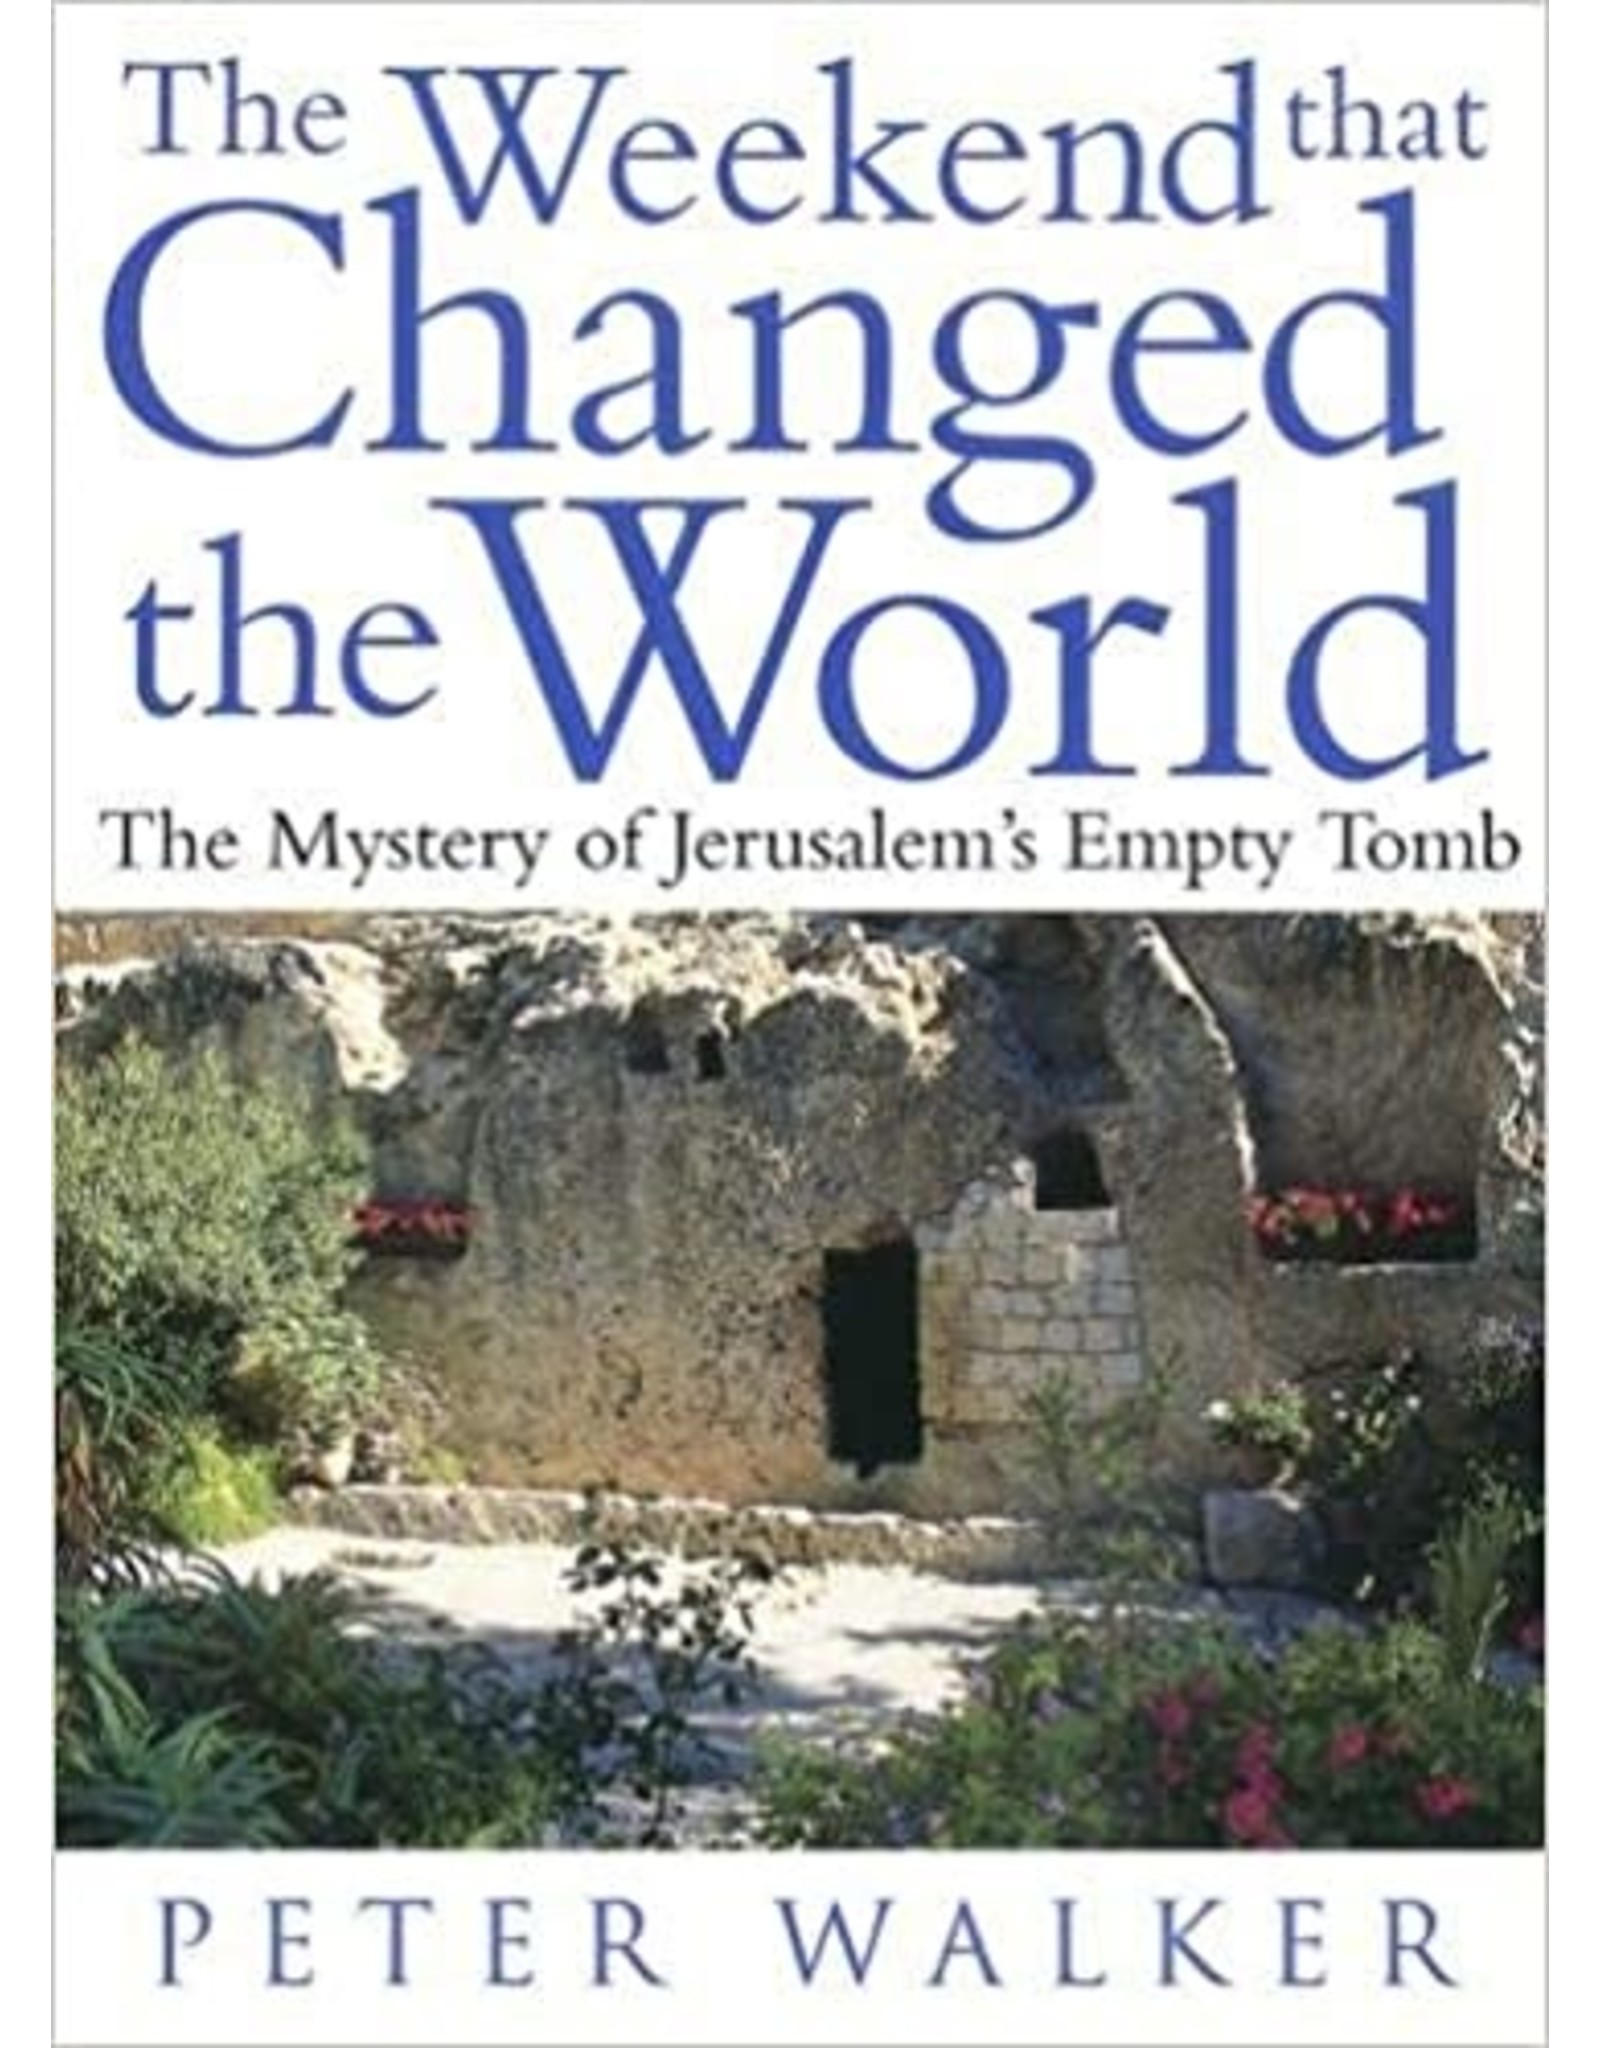 The Weekend that Changed the World: The Mystery of Jerusalem's Empty Tomb